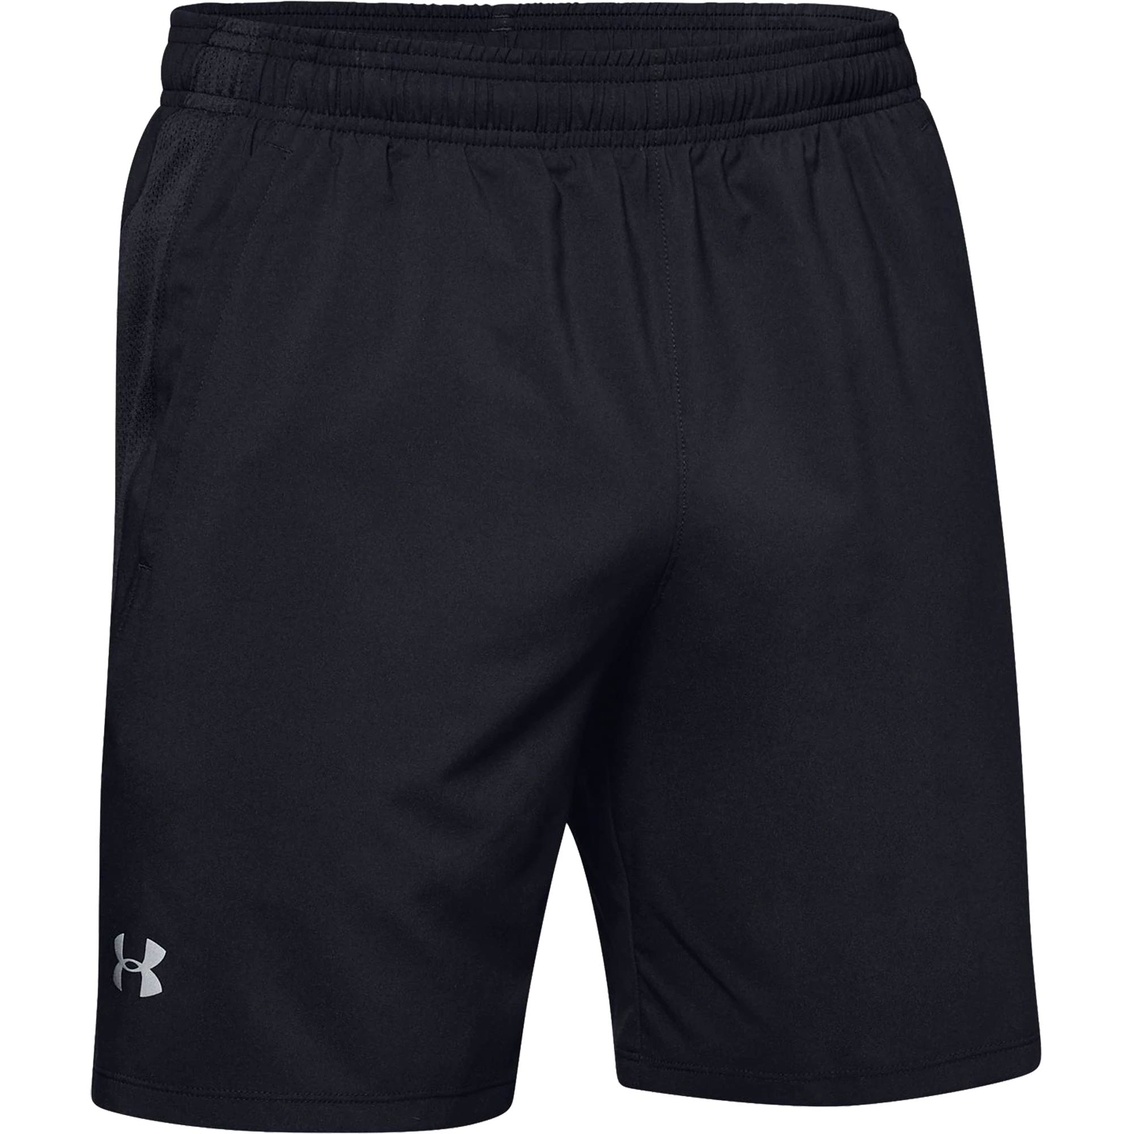 Under Armour Launch SW 7 in. Shorts - Image 4 of 6